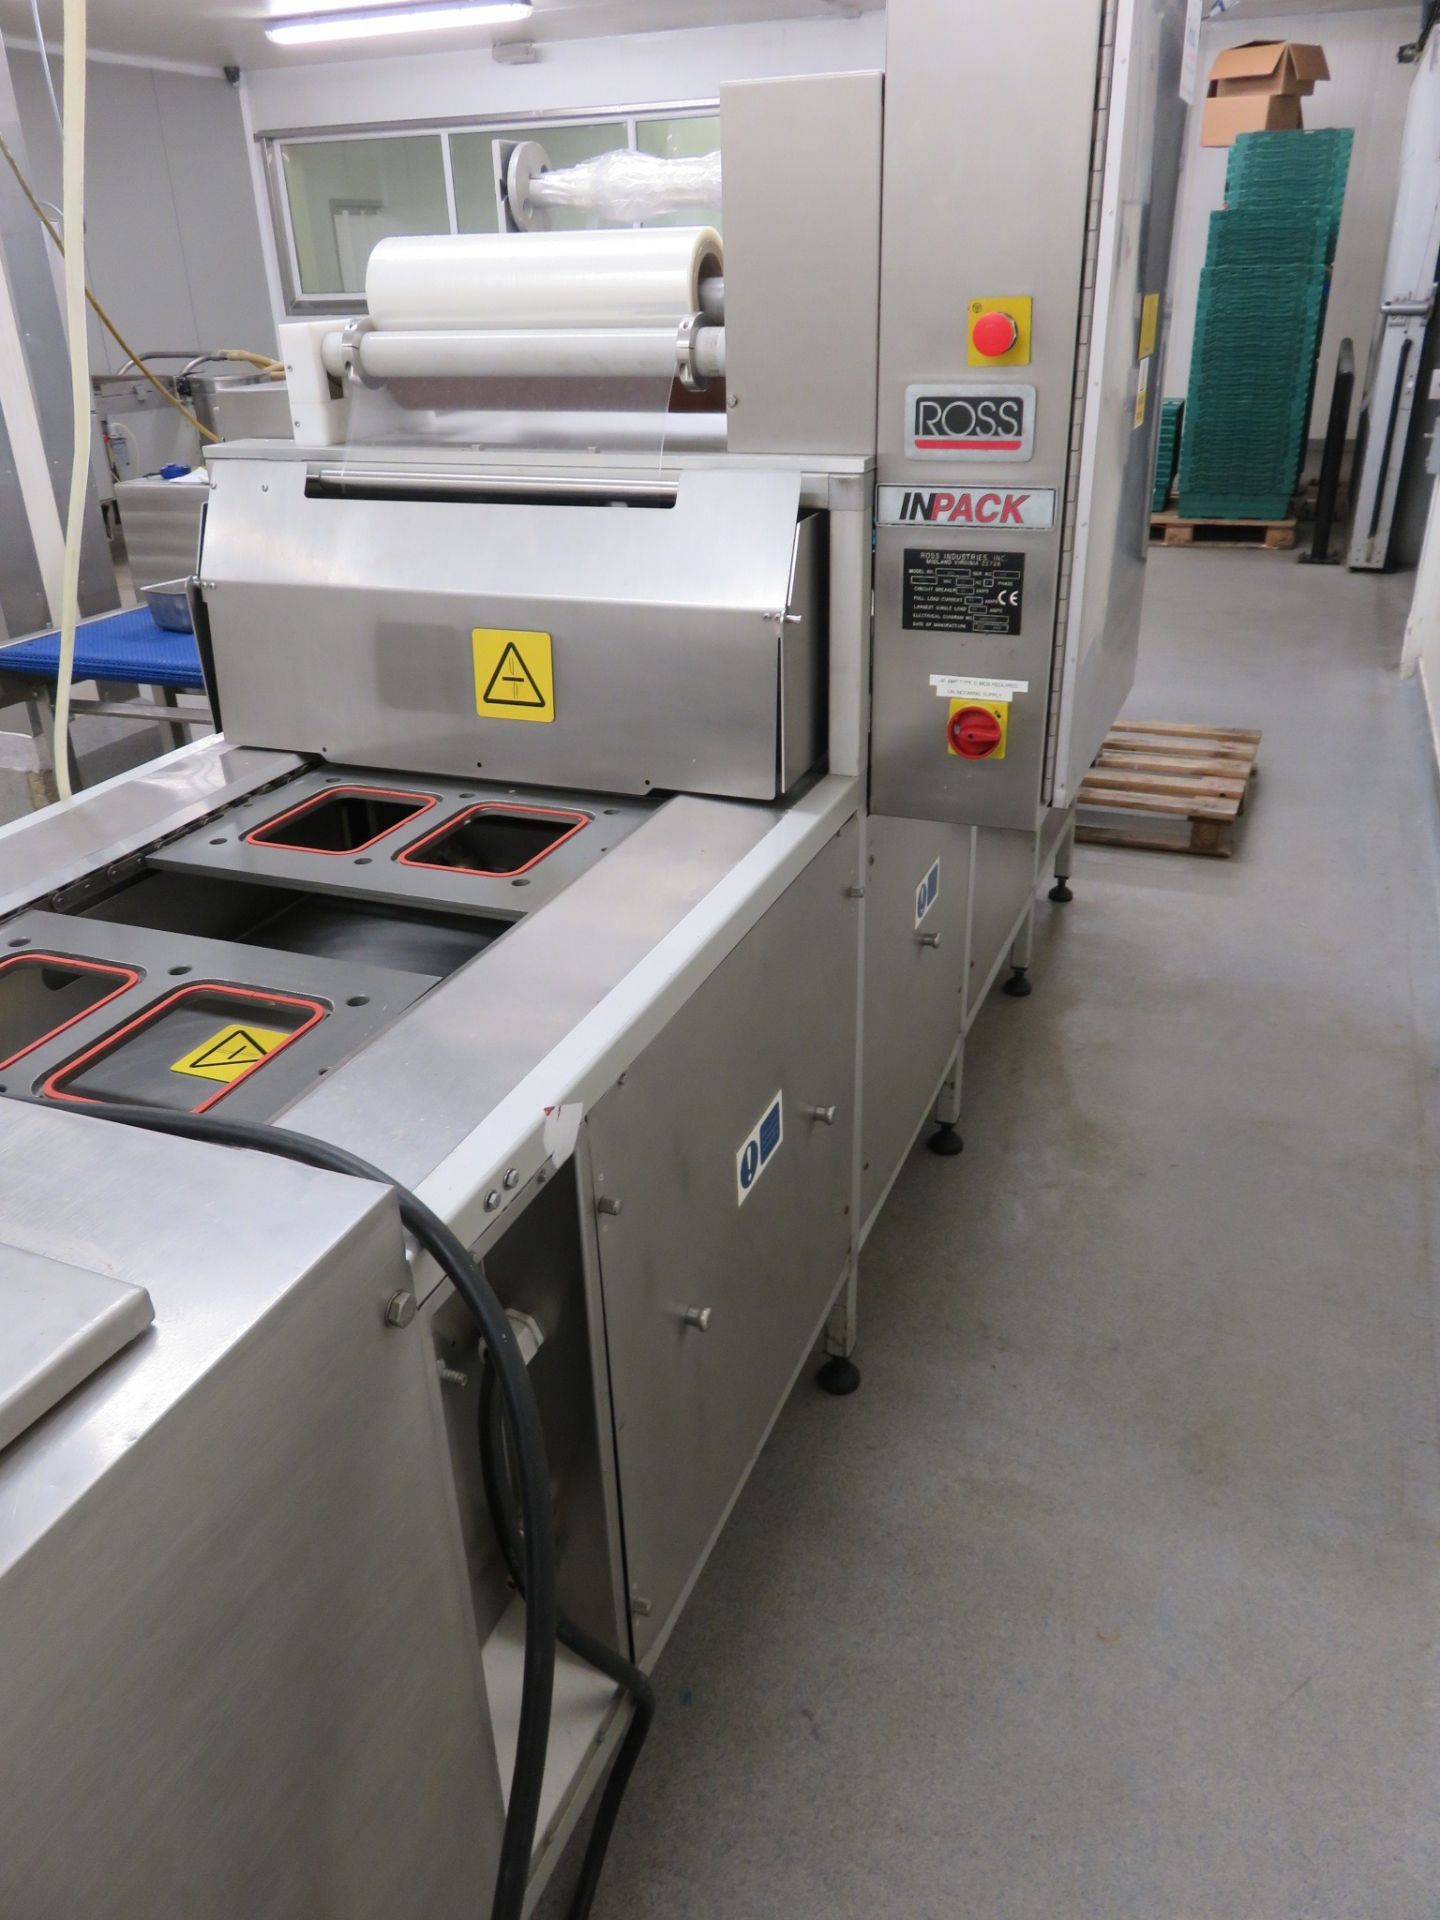 Ross Inpack Junior A20 Automatic Tray Sealer. 10 cycles per minute. Gas & Vacuum. Film width - Image 4 of 8